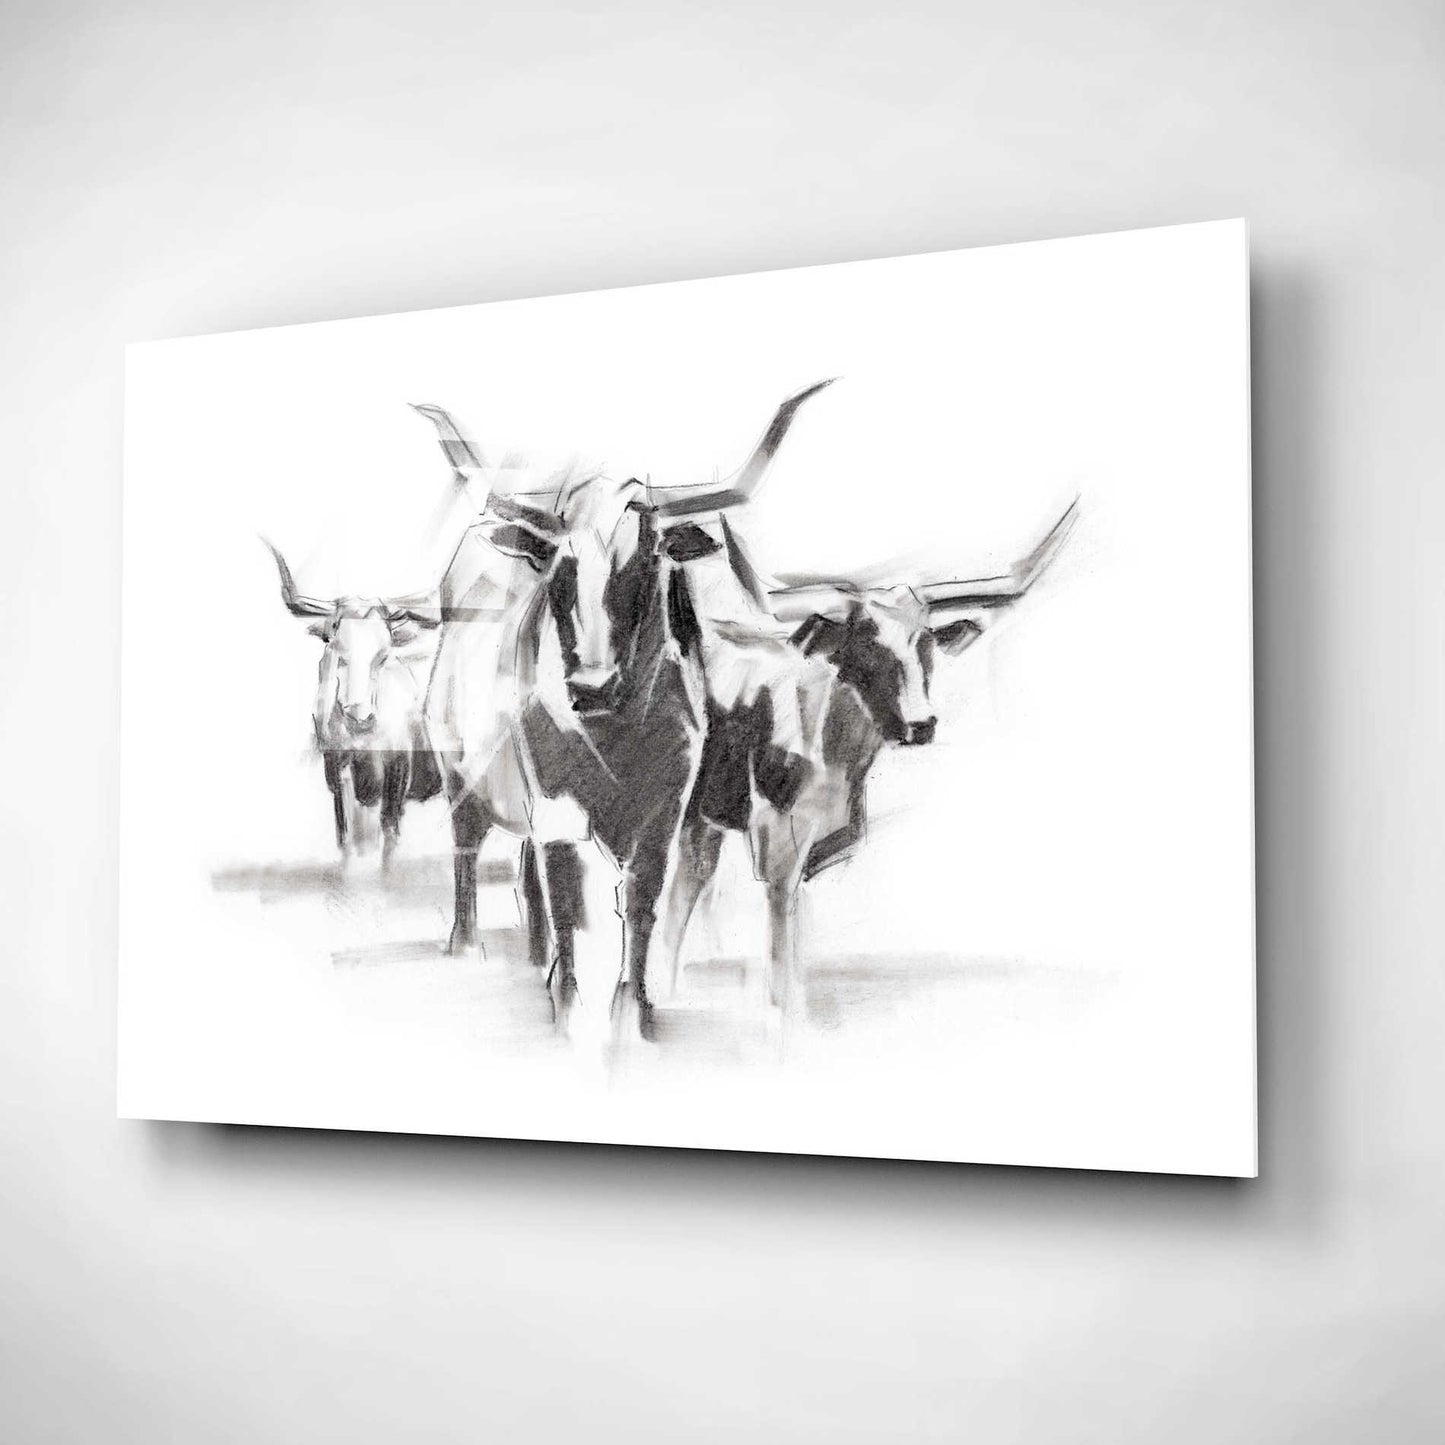 Epic Art 'Contemporary Cattle I' by Ethan Harper, Acrylic Glass Wall Art,24x16